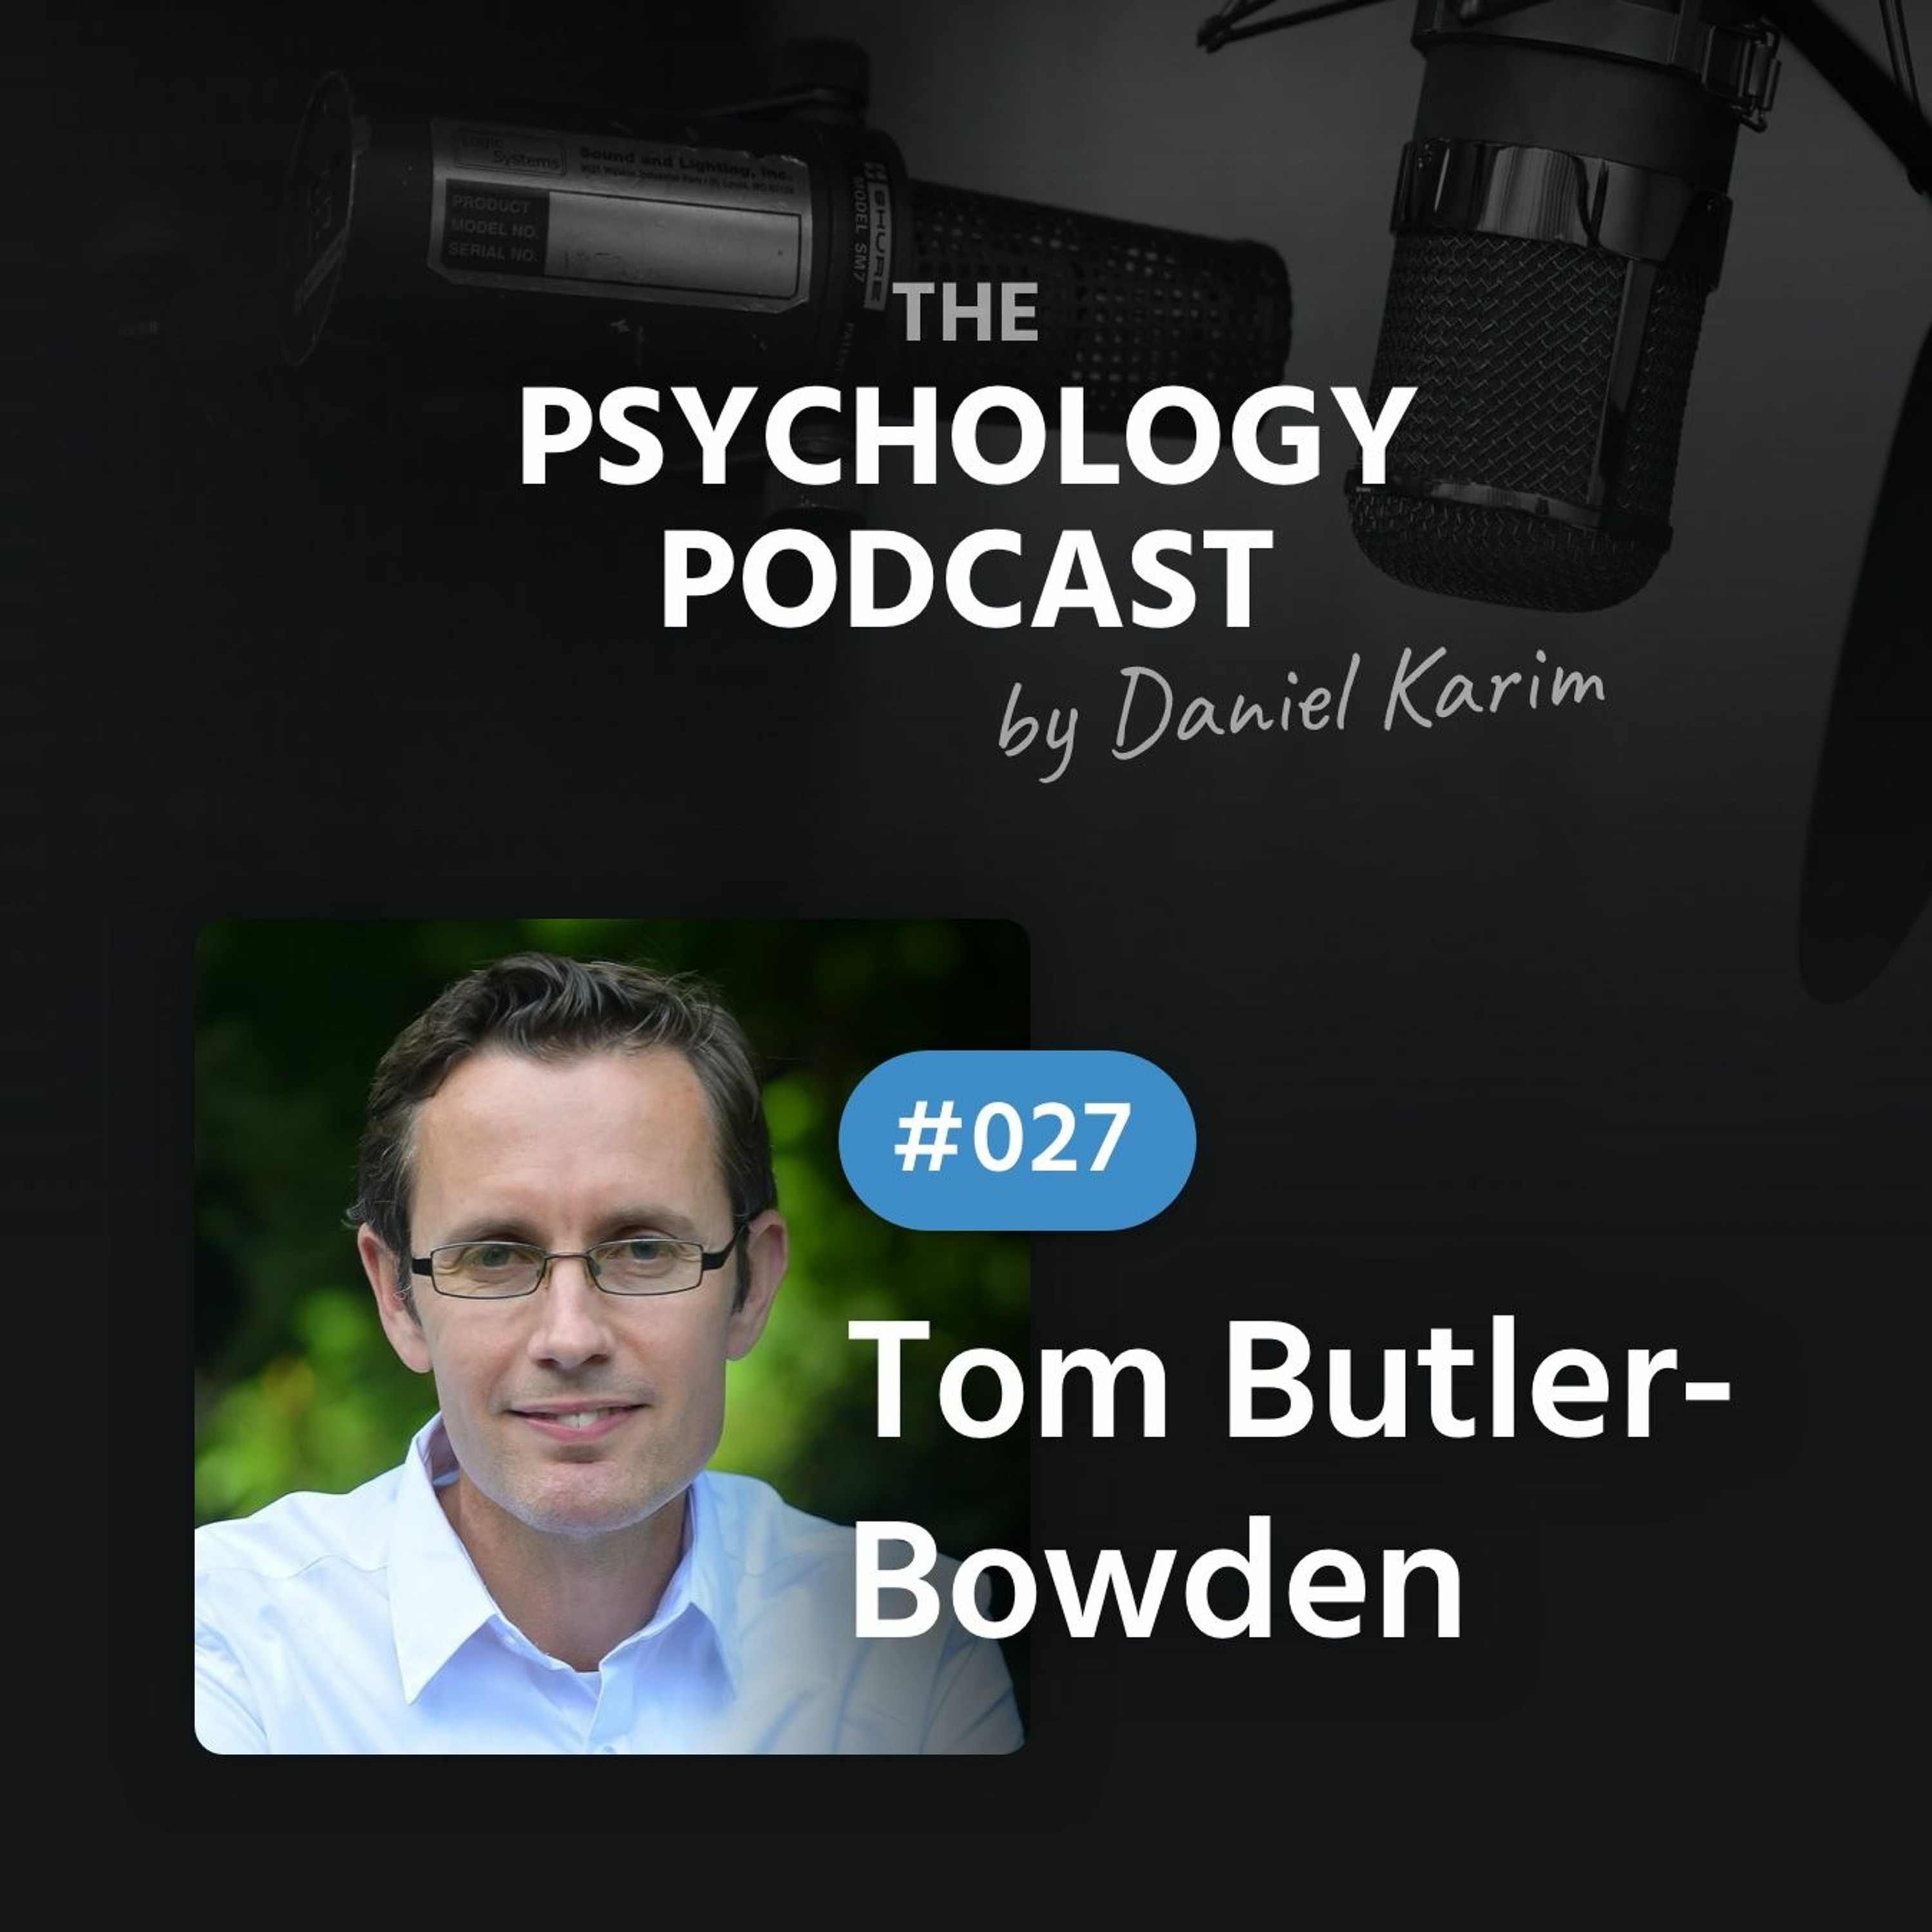 How to become successful? | Tom Butler-Bowden - The Psychology Podcast with Daniel Karim S2 E1